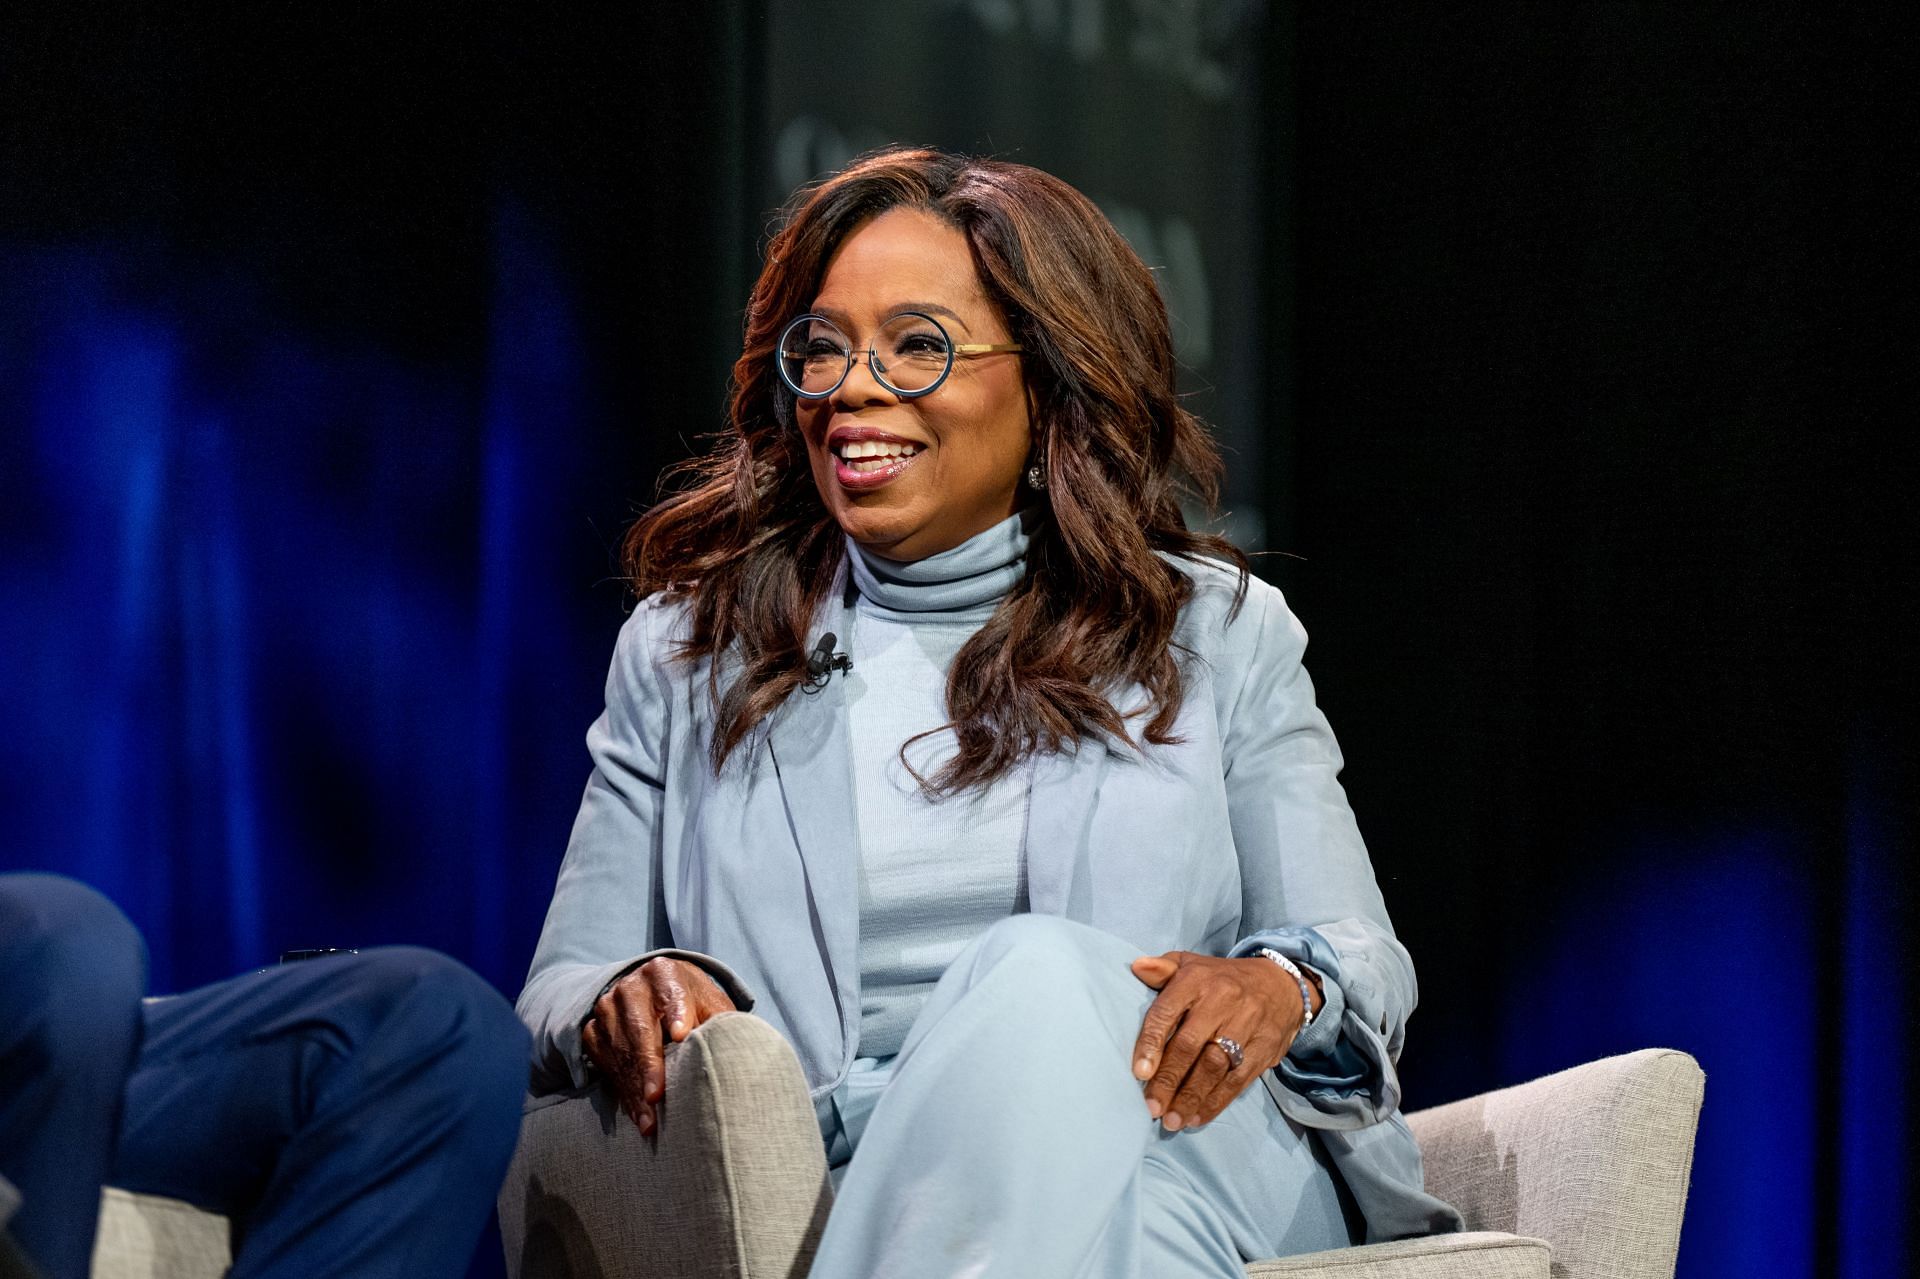 Oprah Winfrey And Arthur C. Brooks In Conversation With George Stephanopoulos: Build The Life You Want